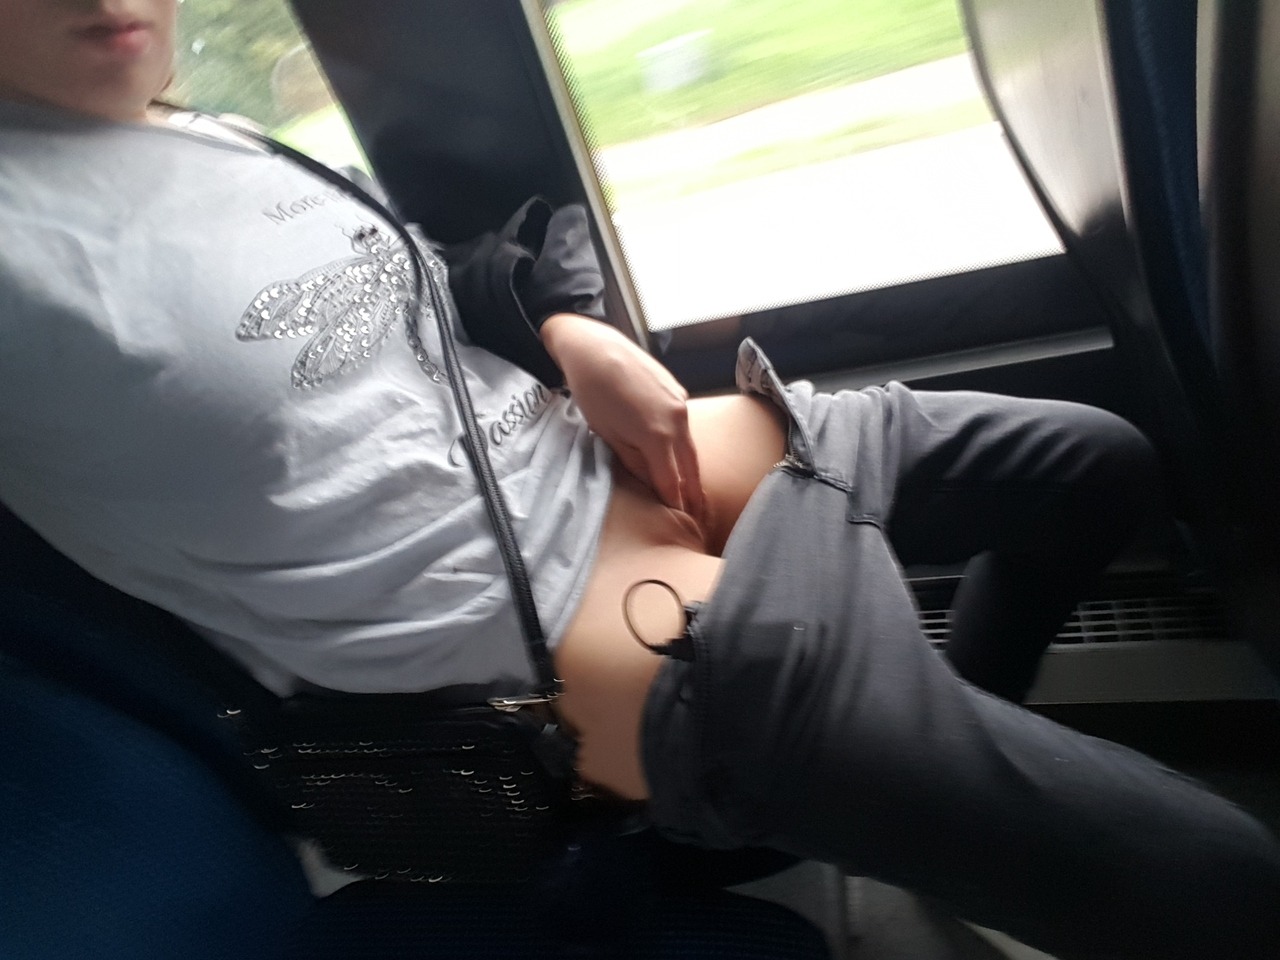 19yearoldslut: Yes I’m in the bus, touching myself ♡ I have to be in the bus for about a half hour and my goal is to let myself cum at least 4 times during the trip ❤❤ I’ll probably upload a video too ;) Reblog if you wanna be here touching